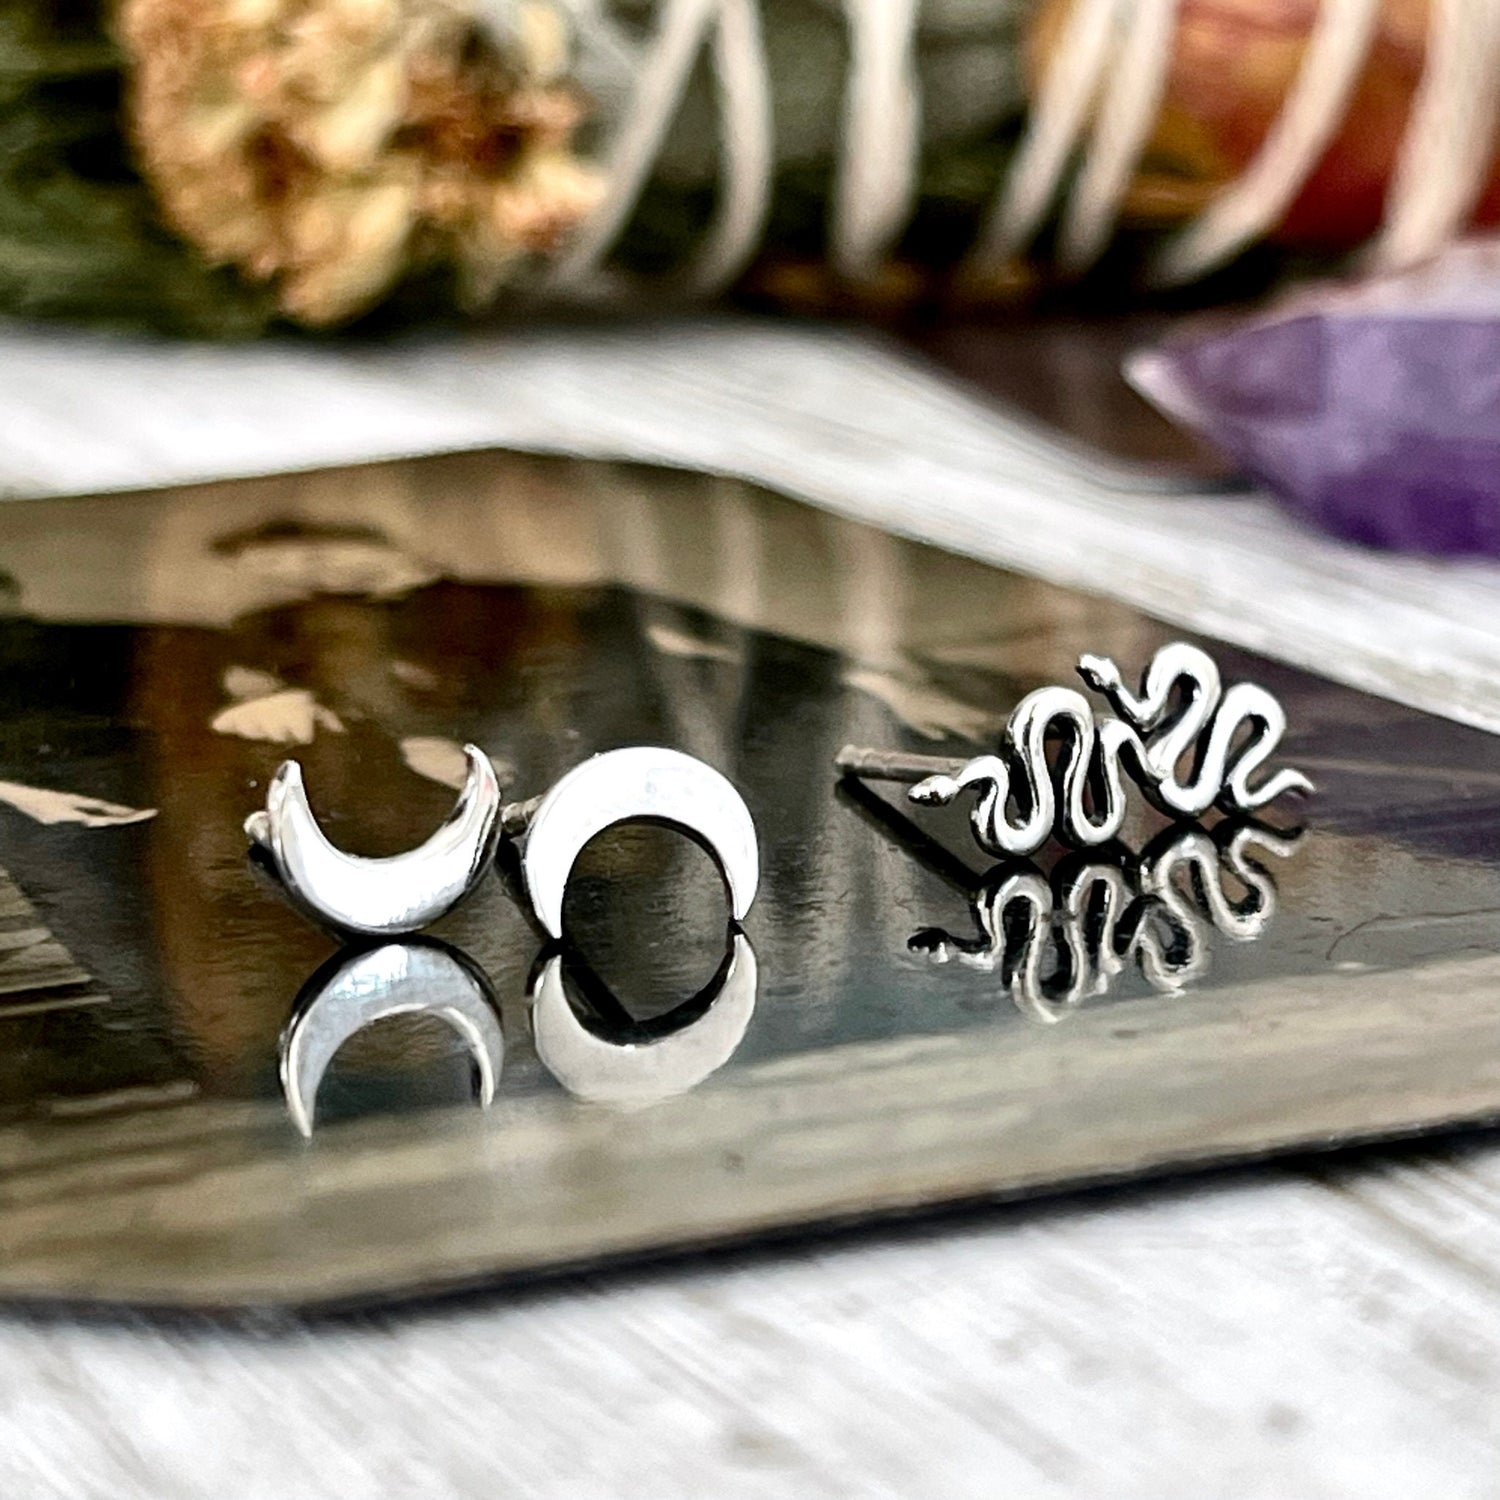 Tiny Crescent Moon and Snake Stud Earring Set / / Sterling Silver Stud Earrings / Witchy Jewelry Gothic Earrings Alternative Magic Punk Rock